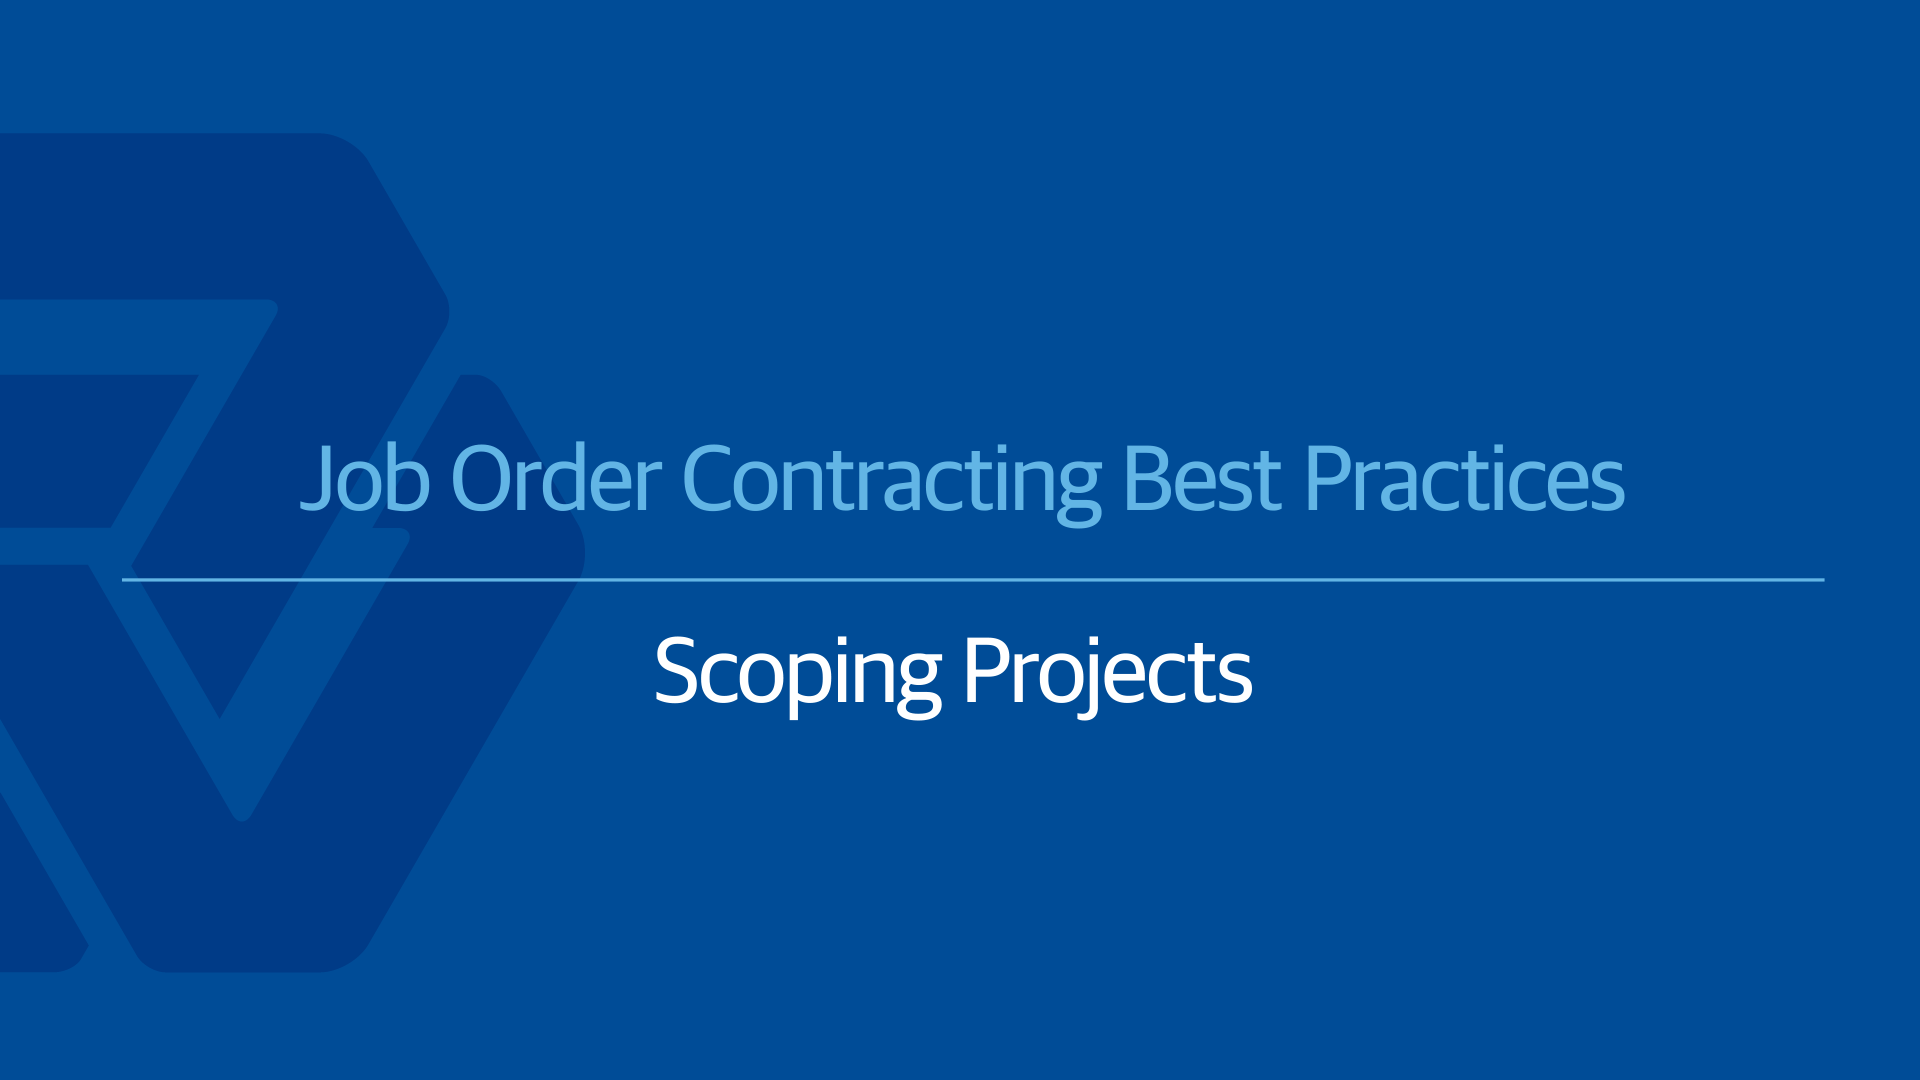  Job Order Contracting Best Practices: Creating a Detailed Scope of Work 